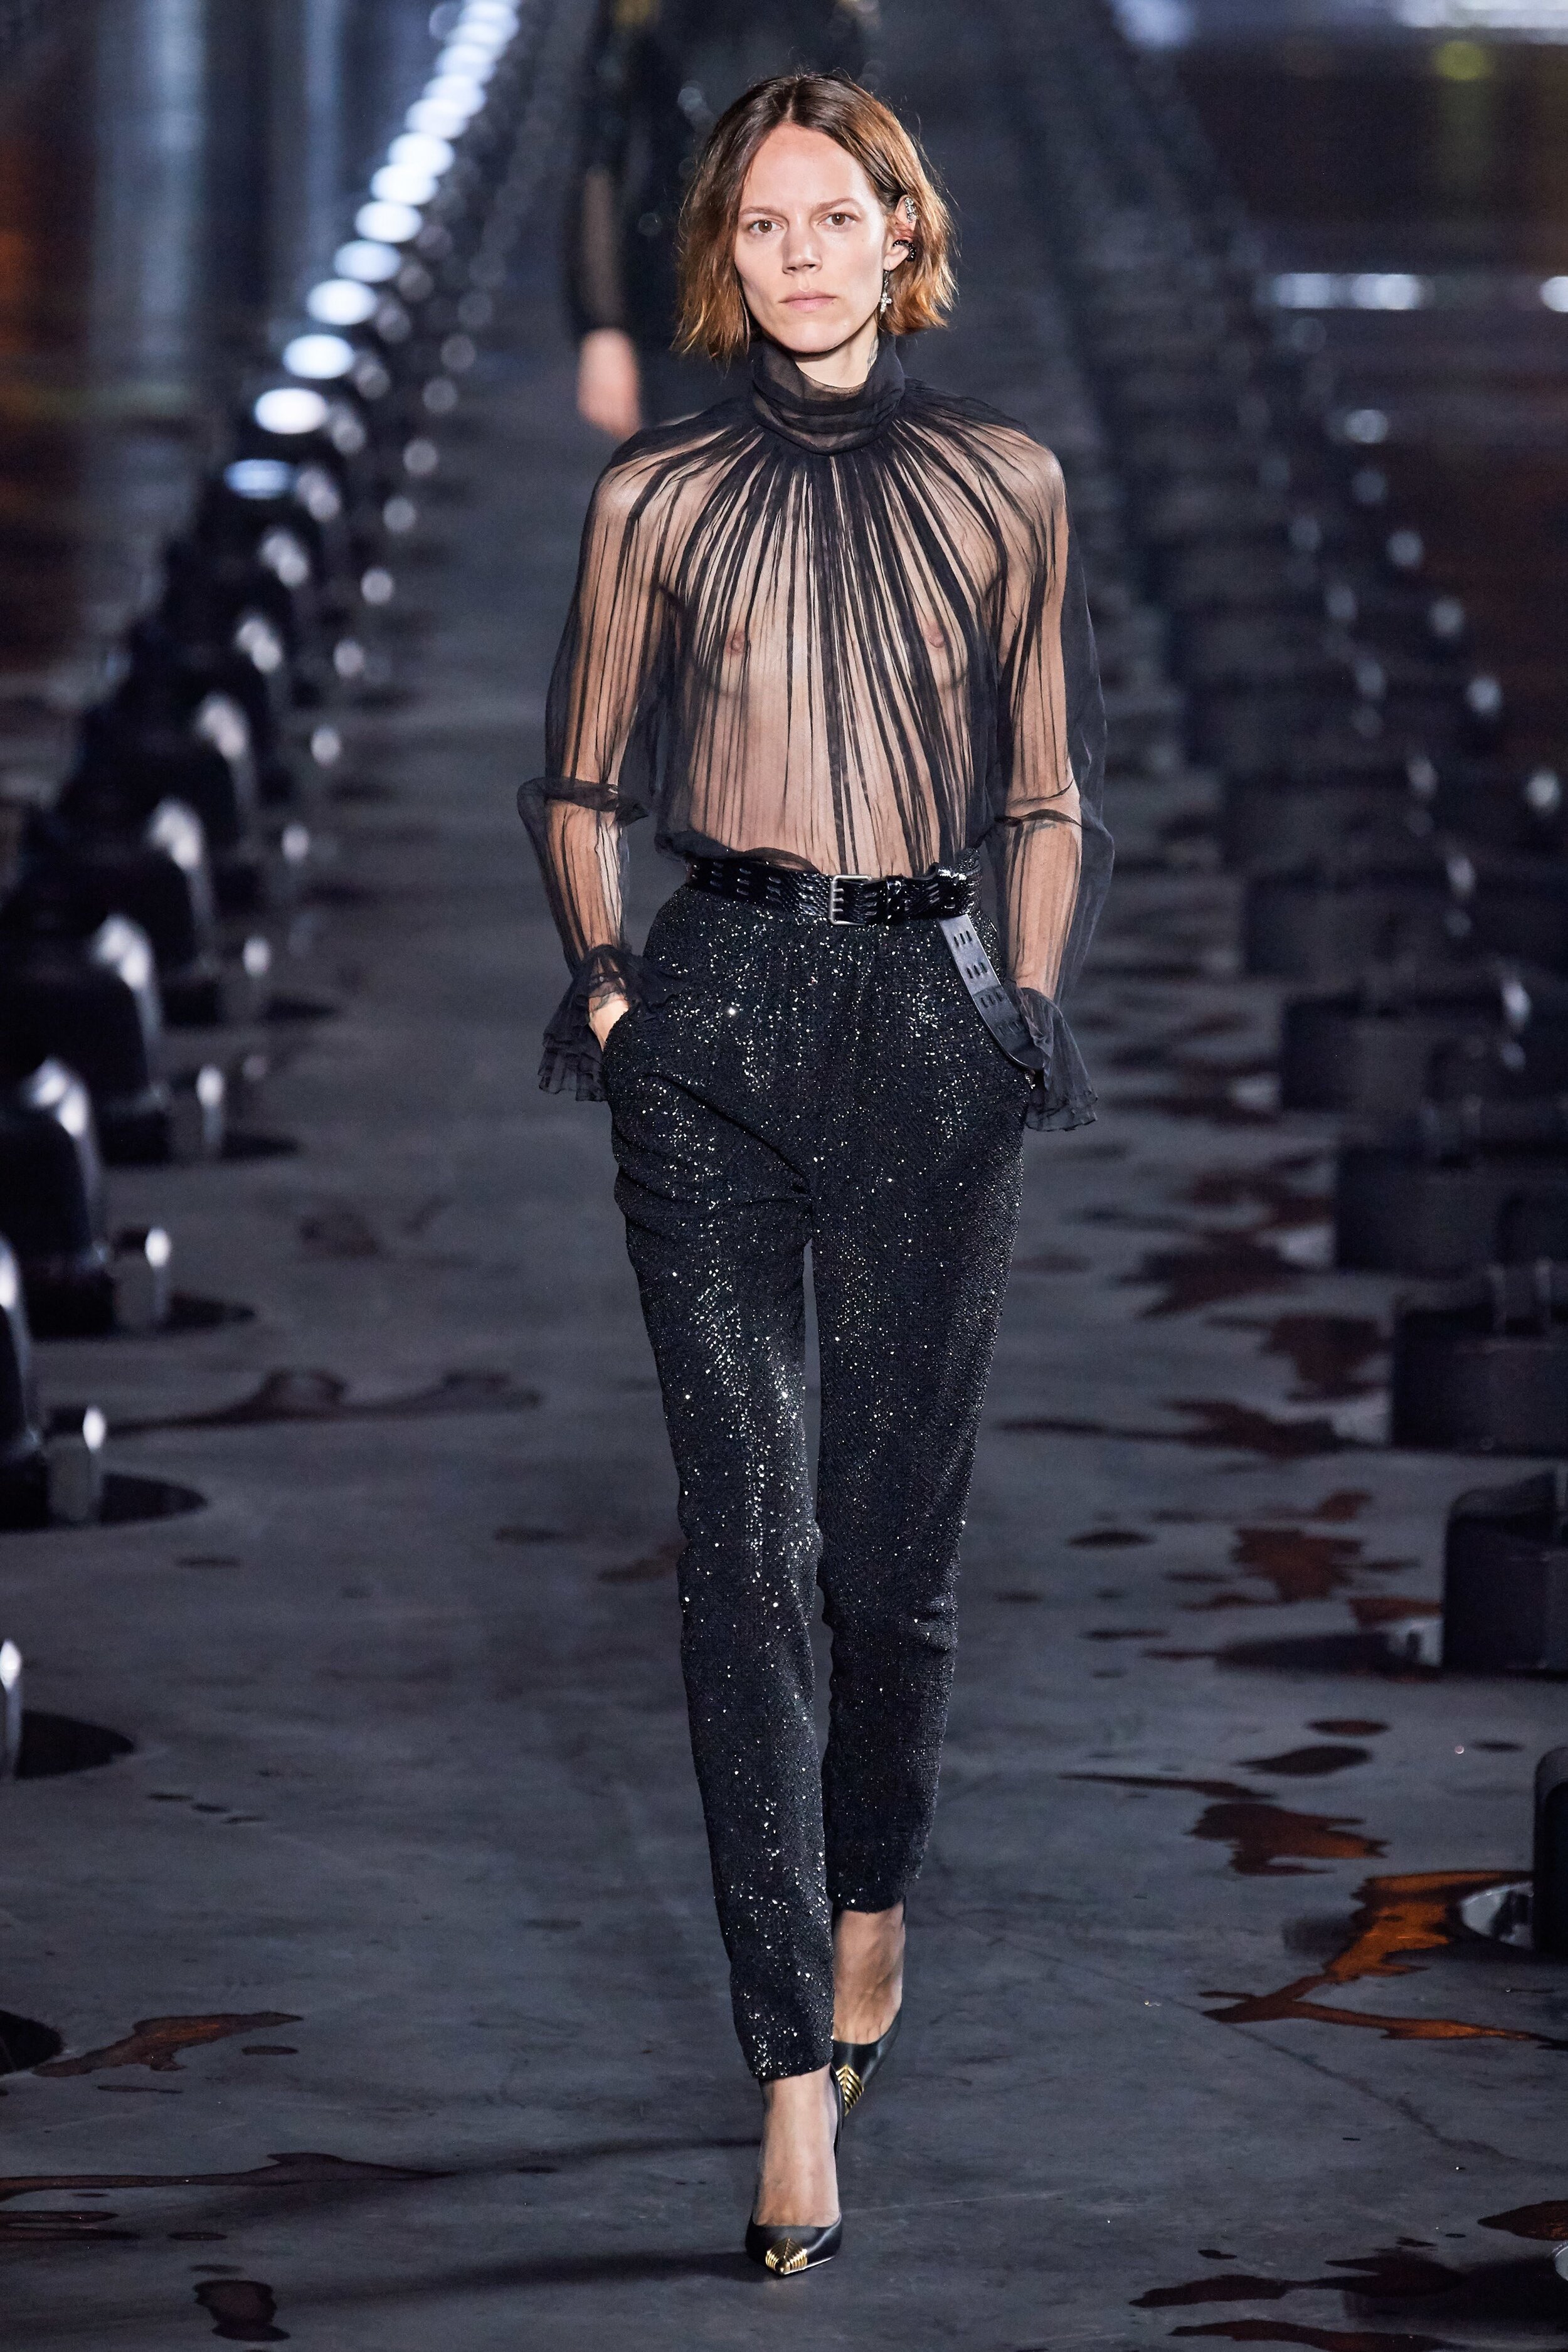 Saint Laurent by Anthony Vaccarello 